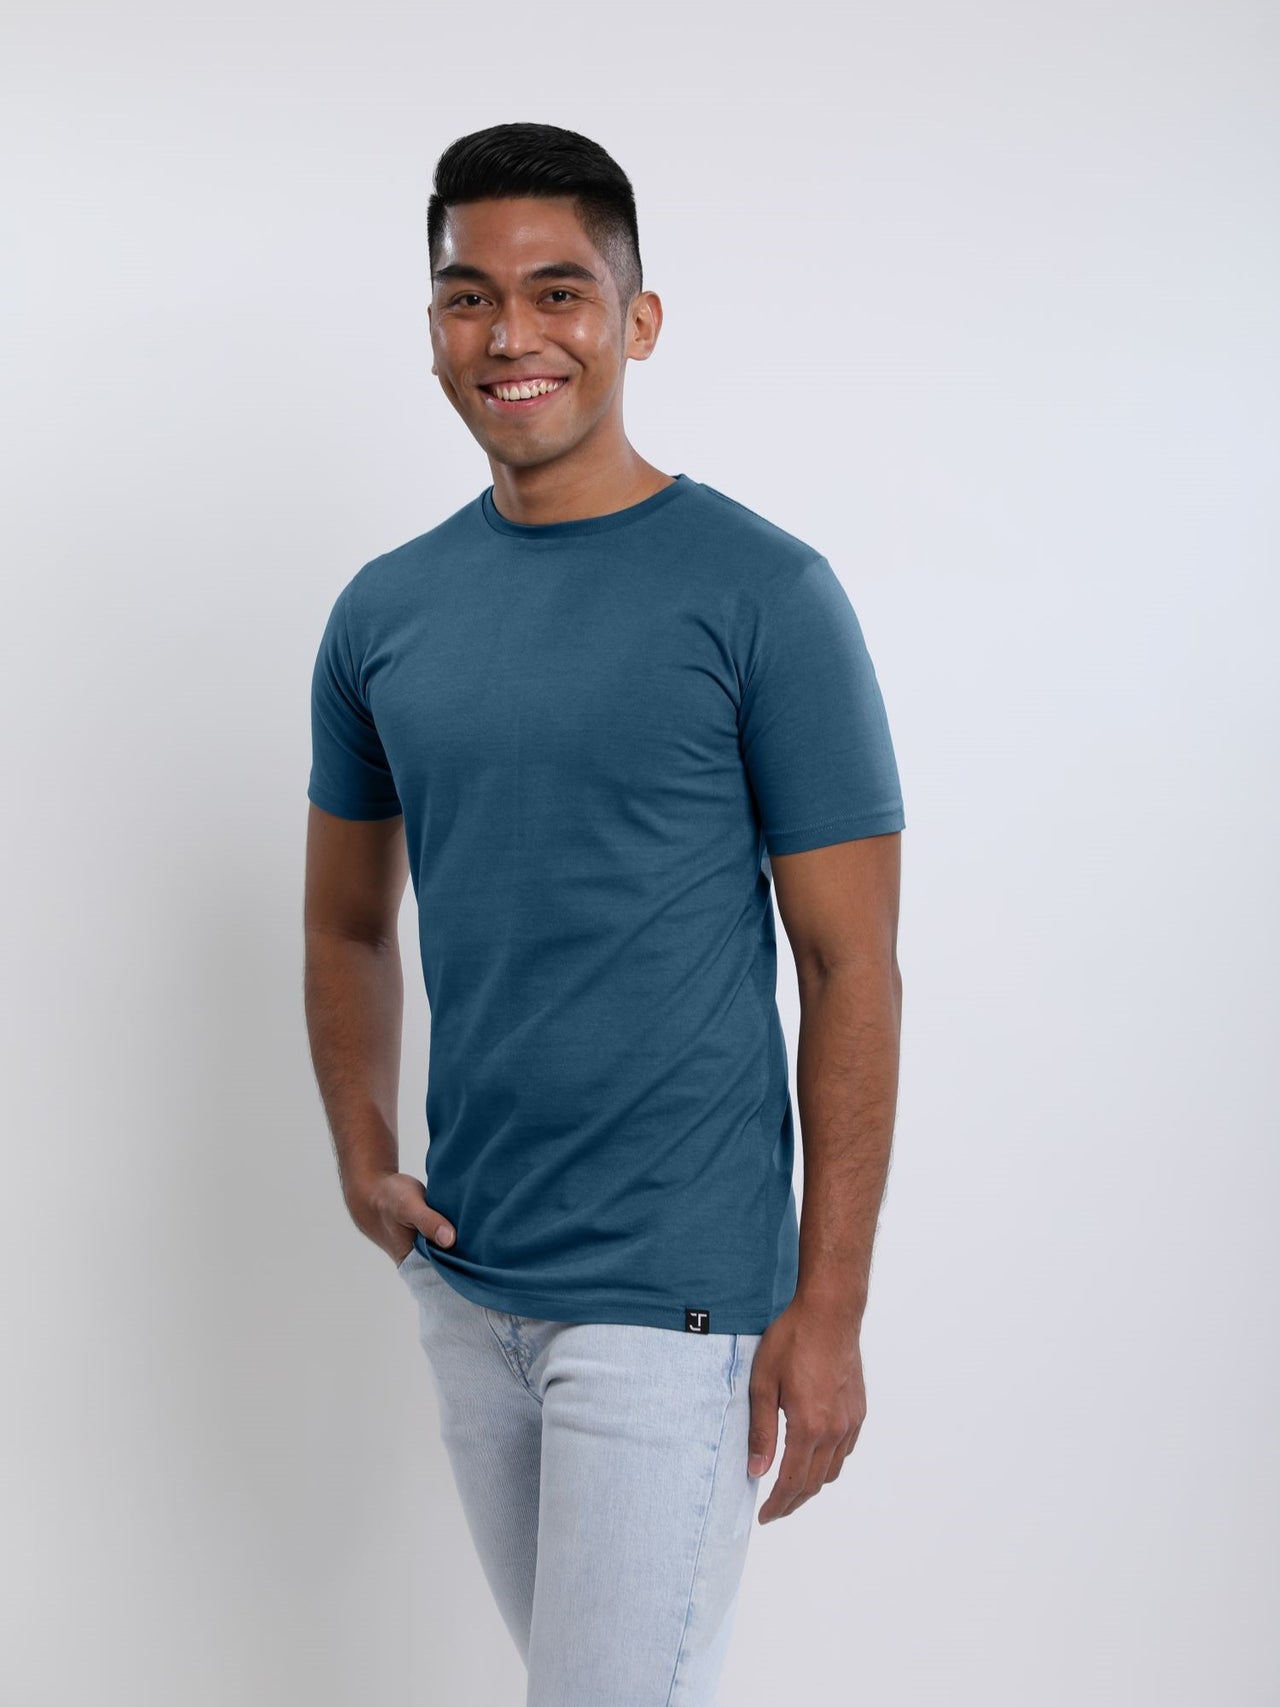 An upper body shot of a tall skinny guy wearing a petrol medium tall t-shirt, hand in pocket and smiling.